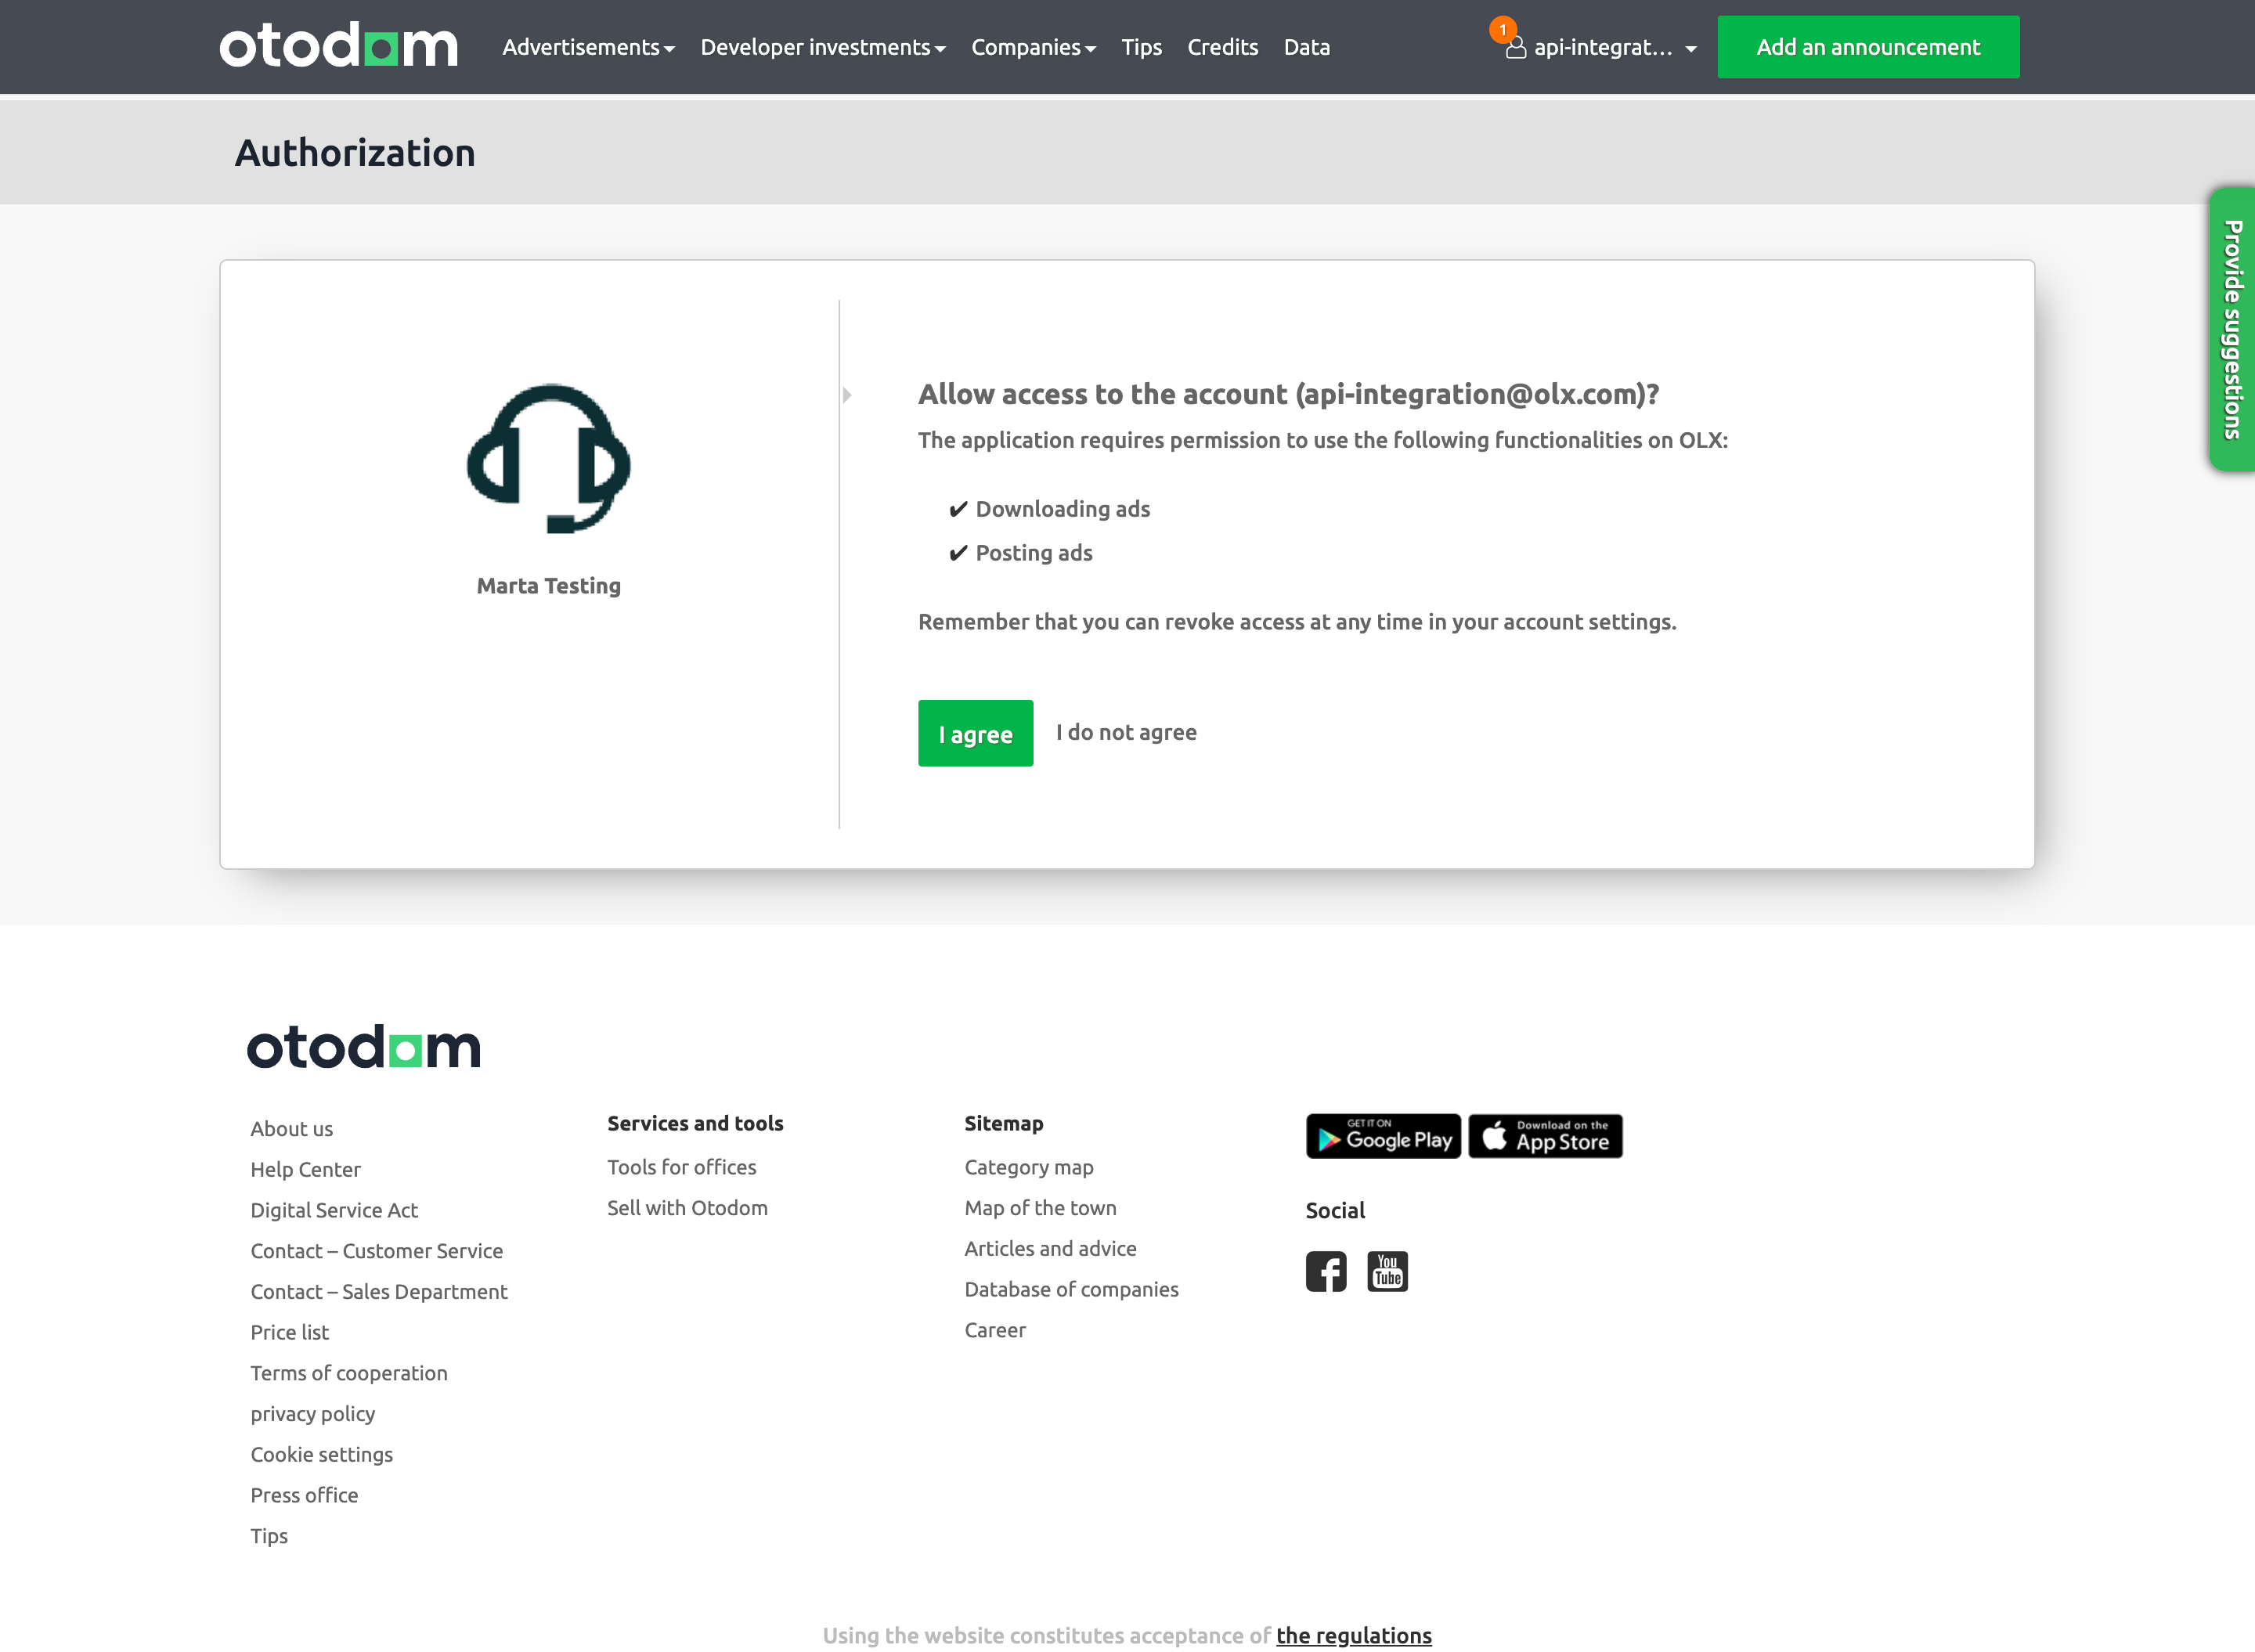 Otodom Authentication page

